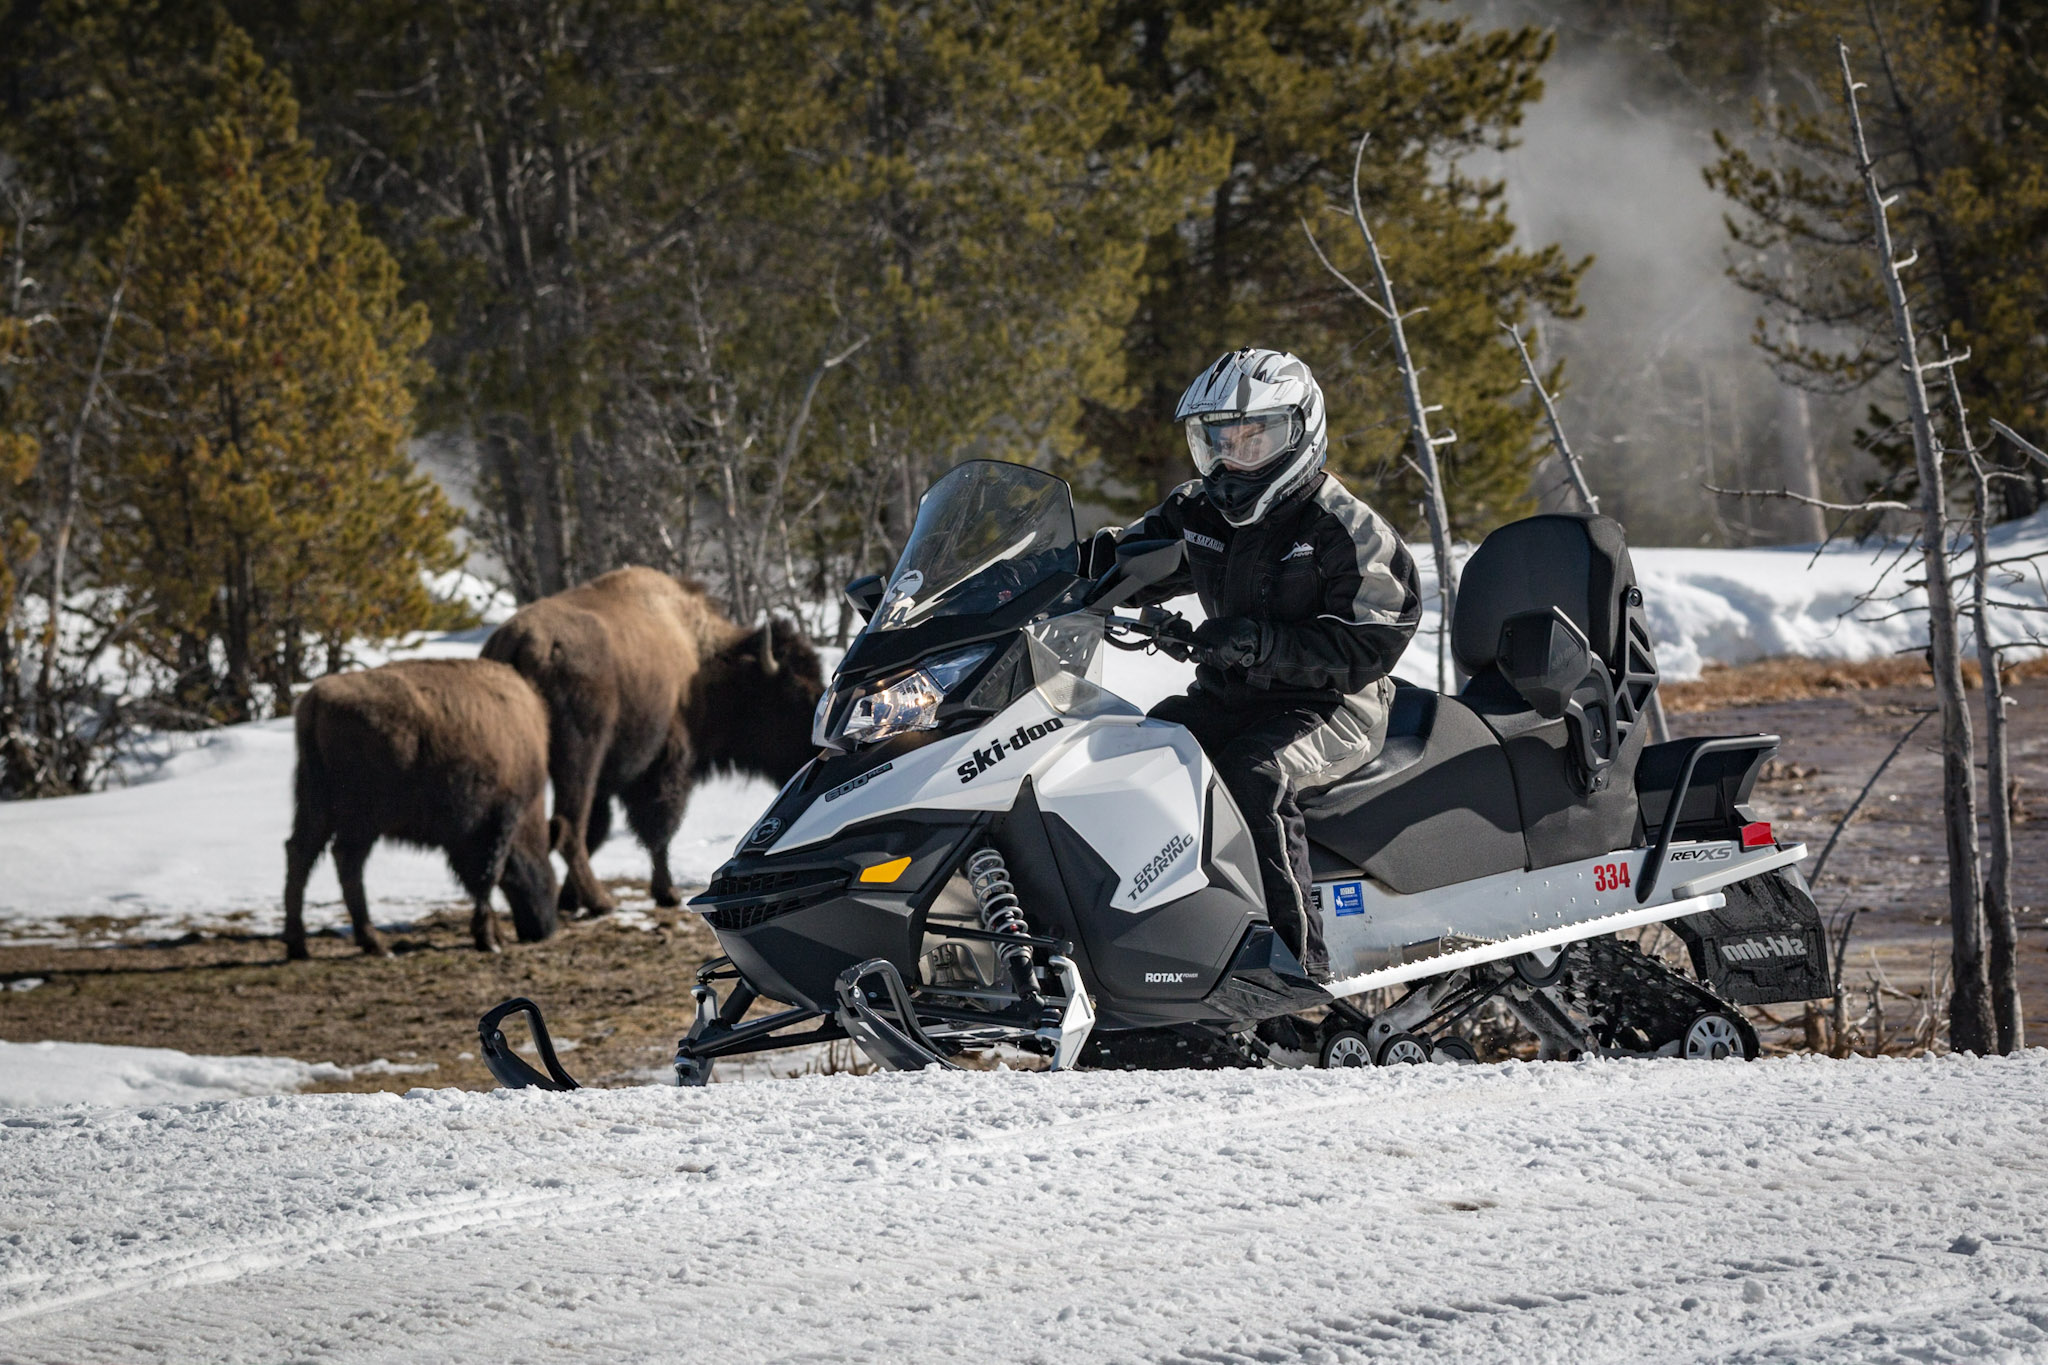 Man snowmobiling in the snow near a moose and bison in the forest